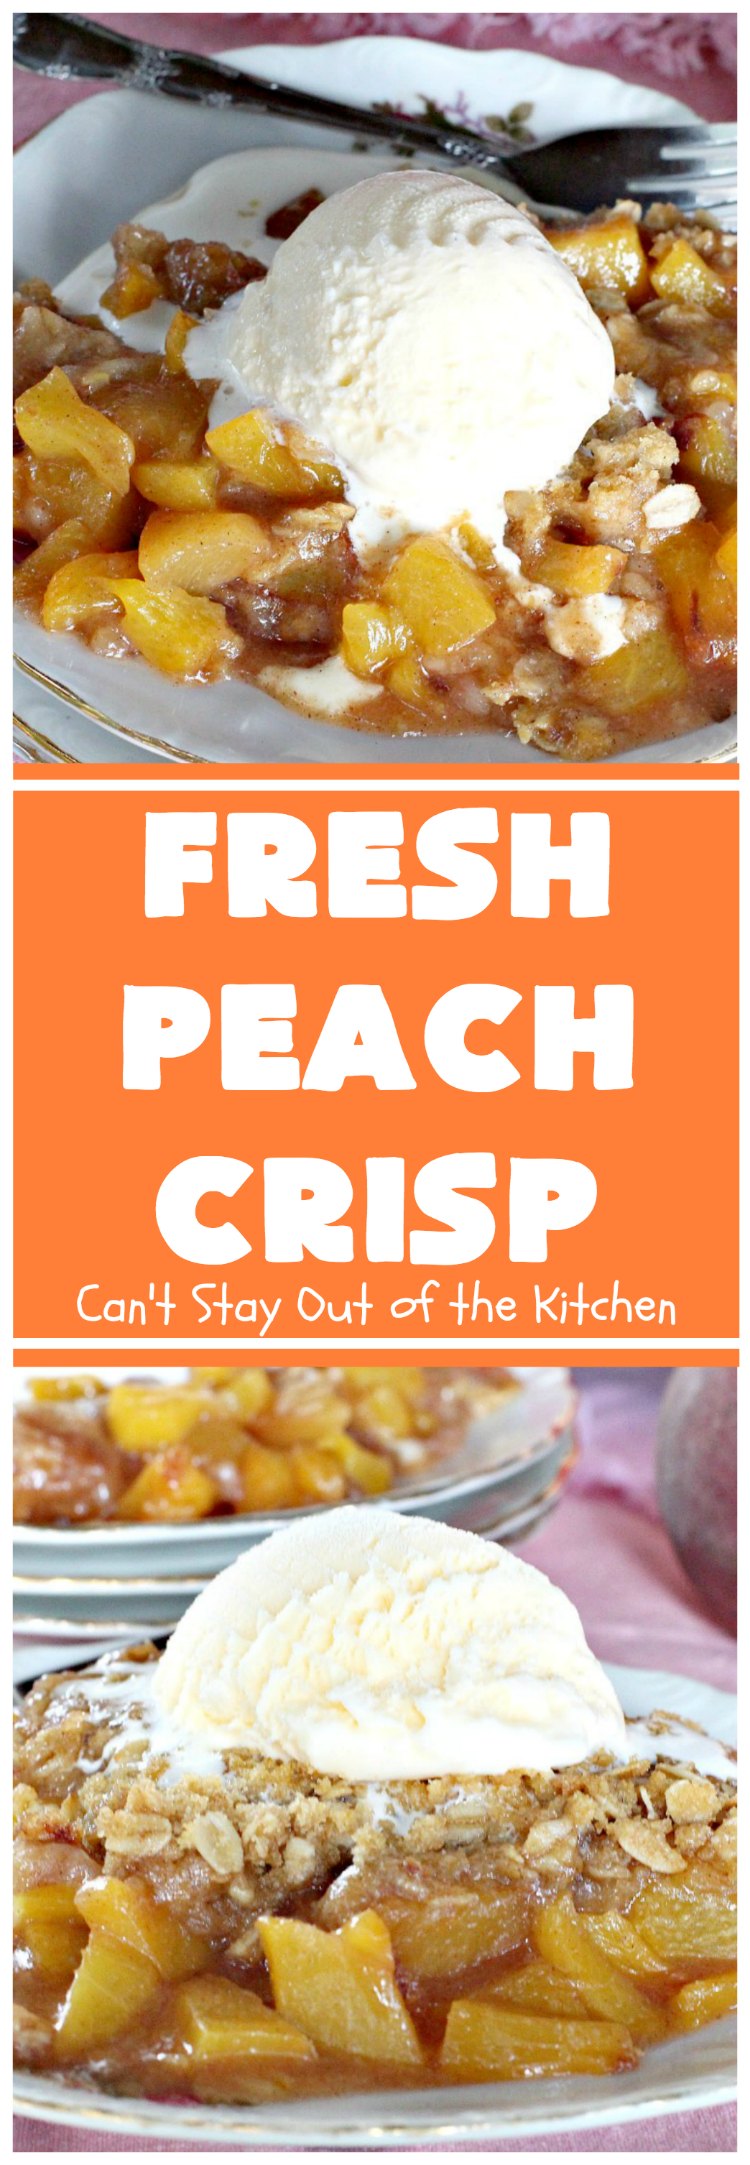 Fresh Peach Crisp | Can't Stay Out of the Kitchen